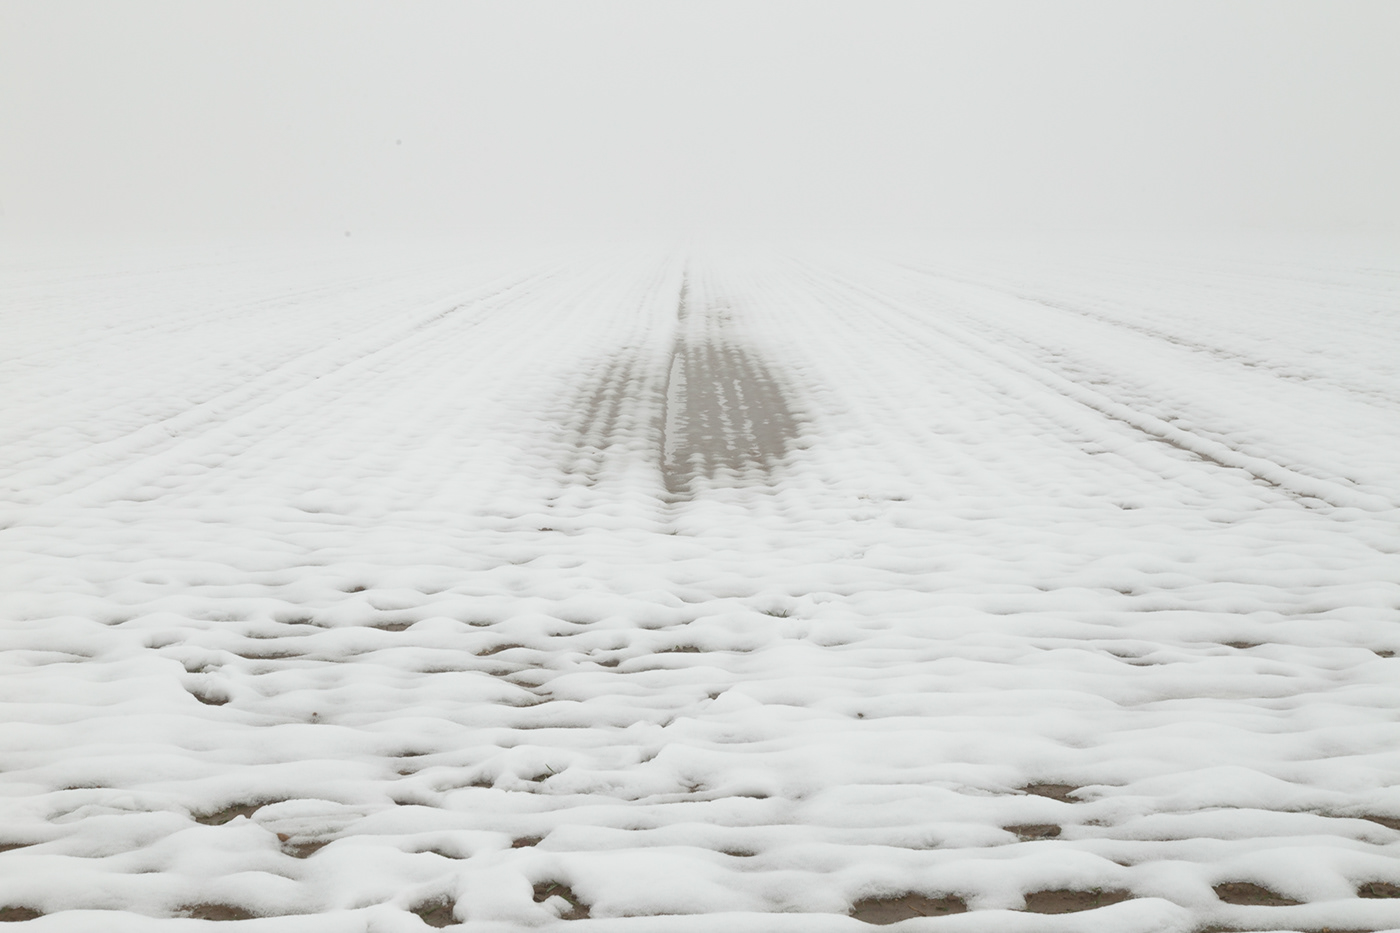 snowy field with diminishing perspective toward nowhere